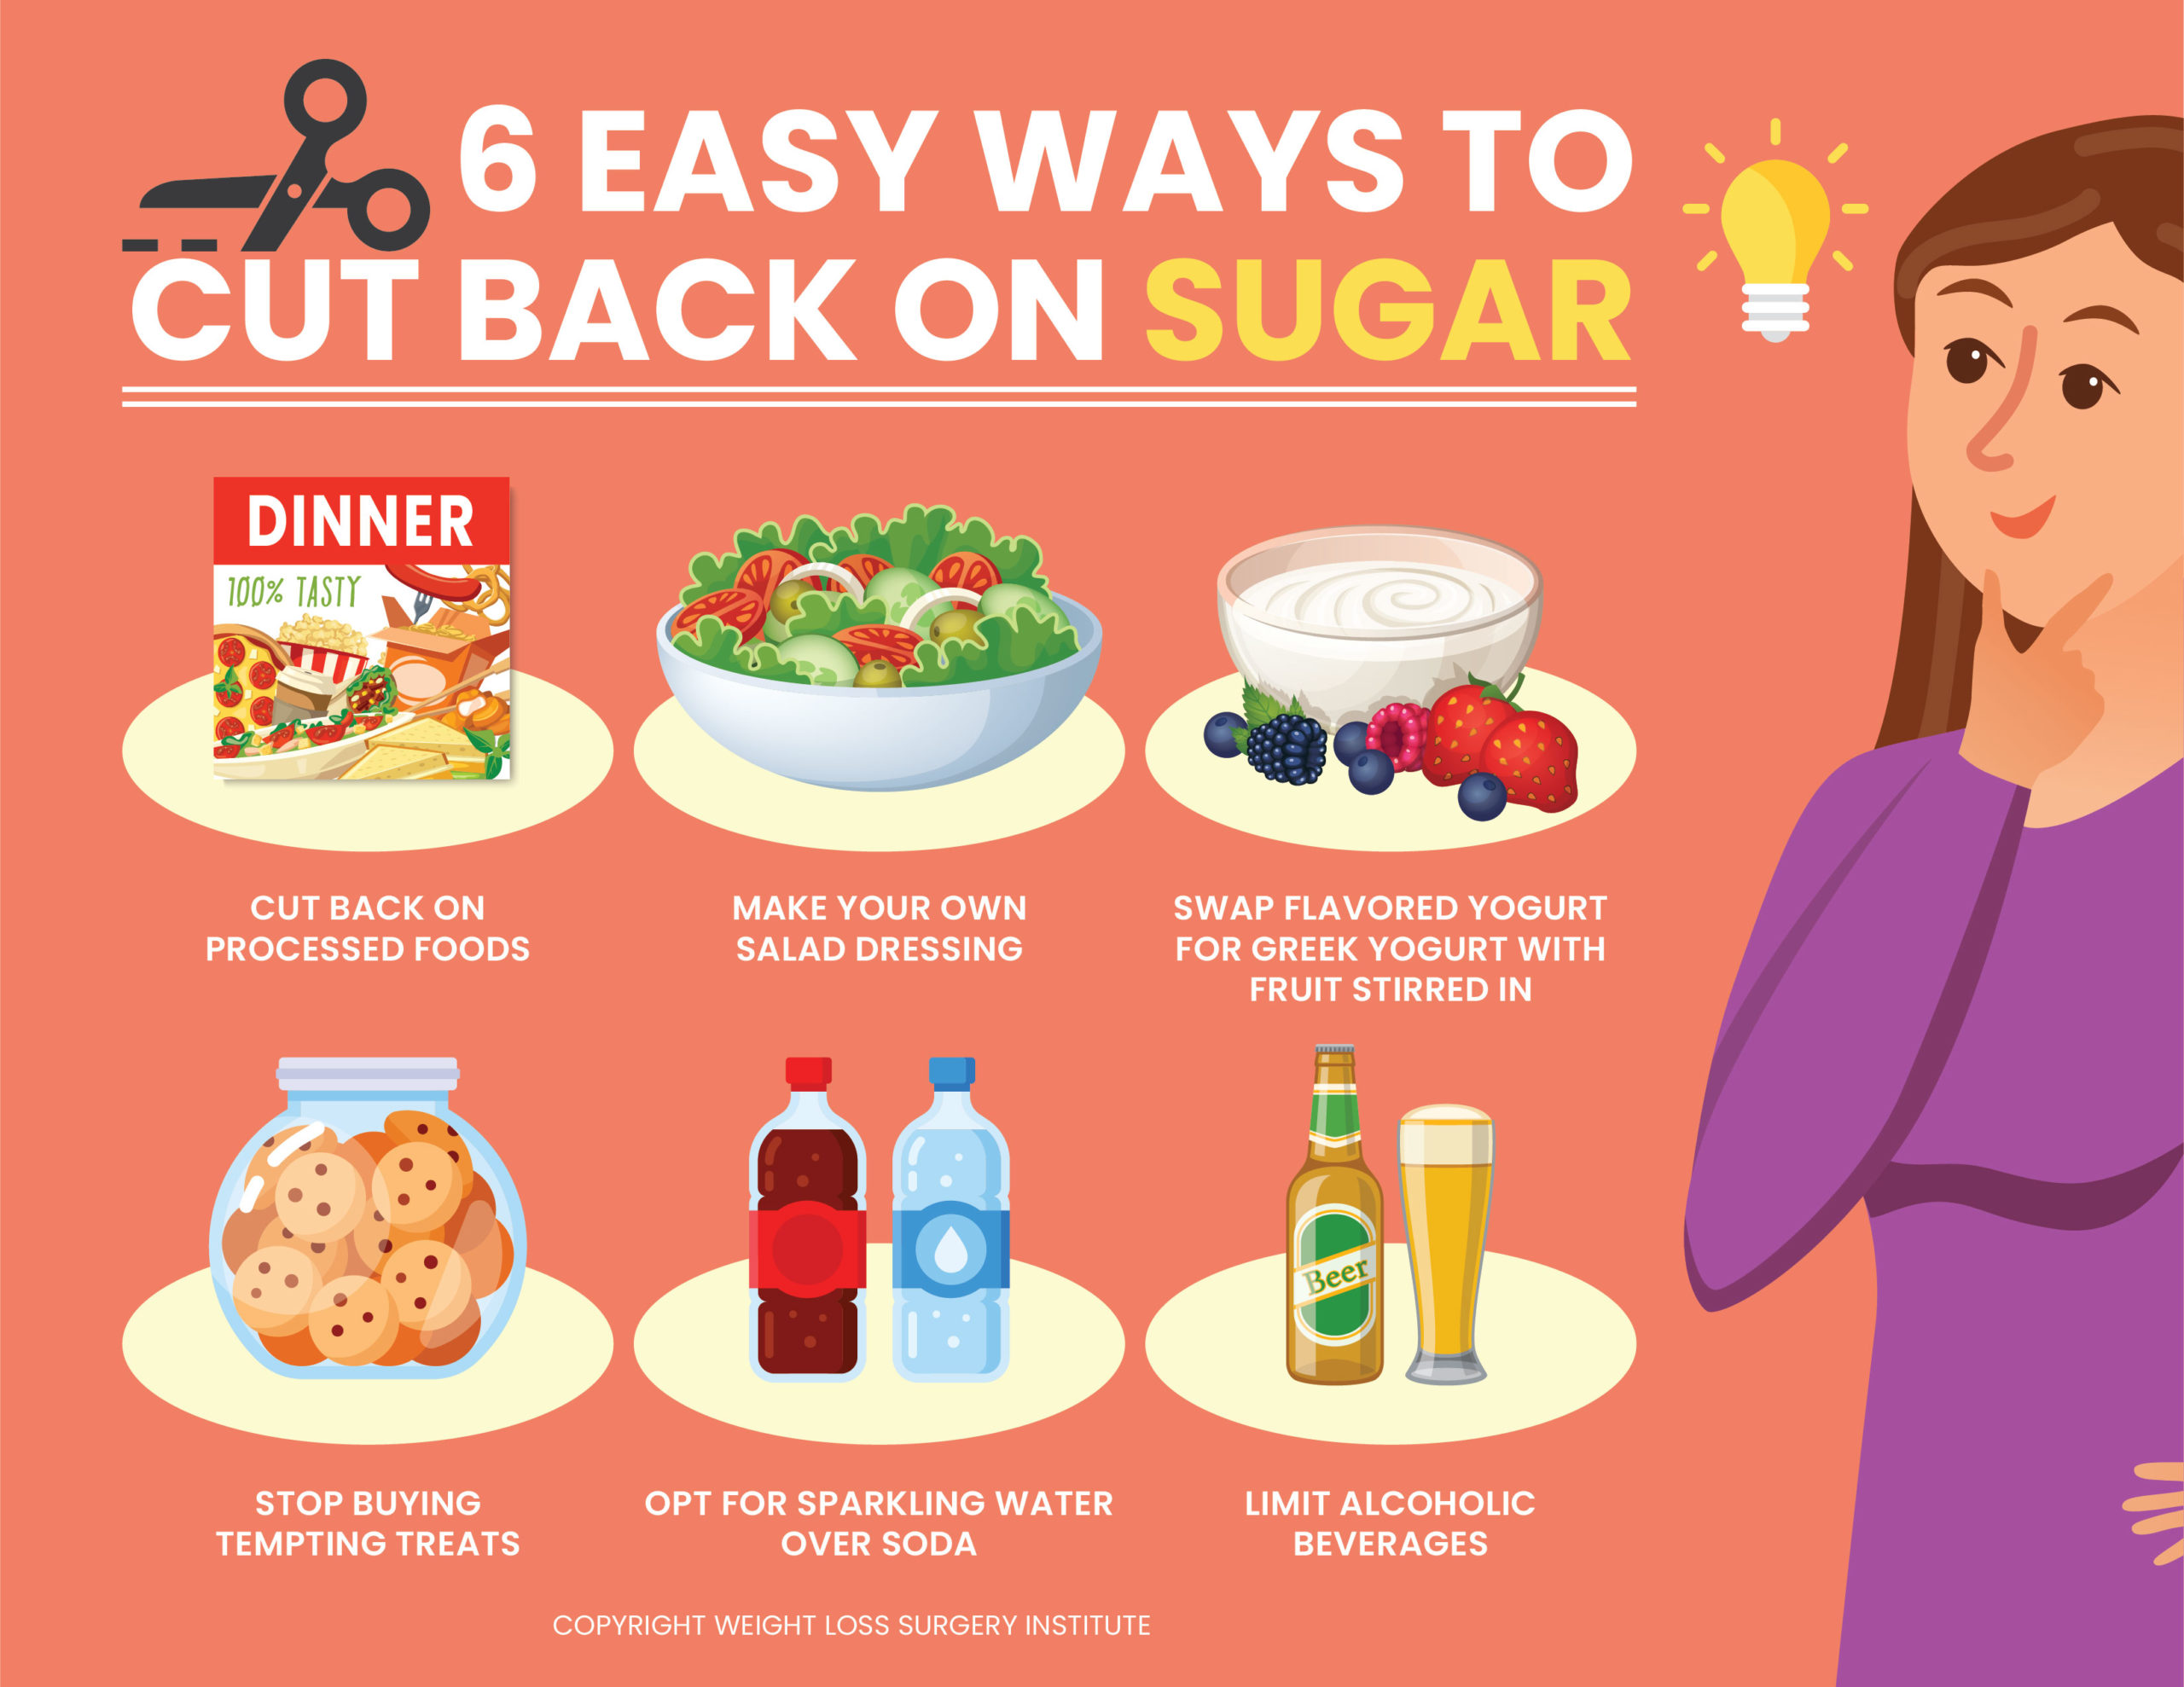 how to cut back on sugar - an infographic showing how you can reduce sugar intake